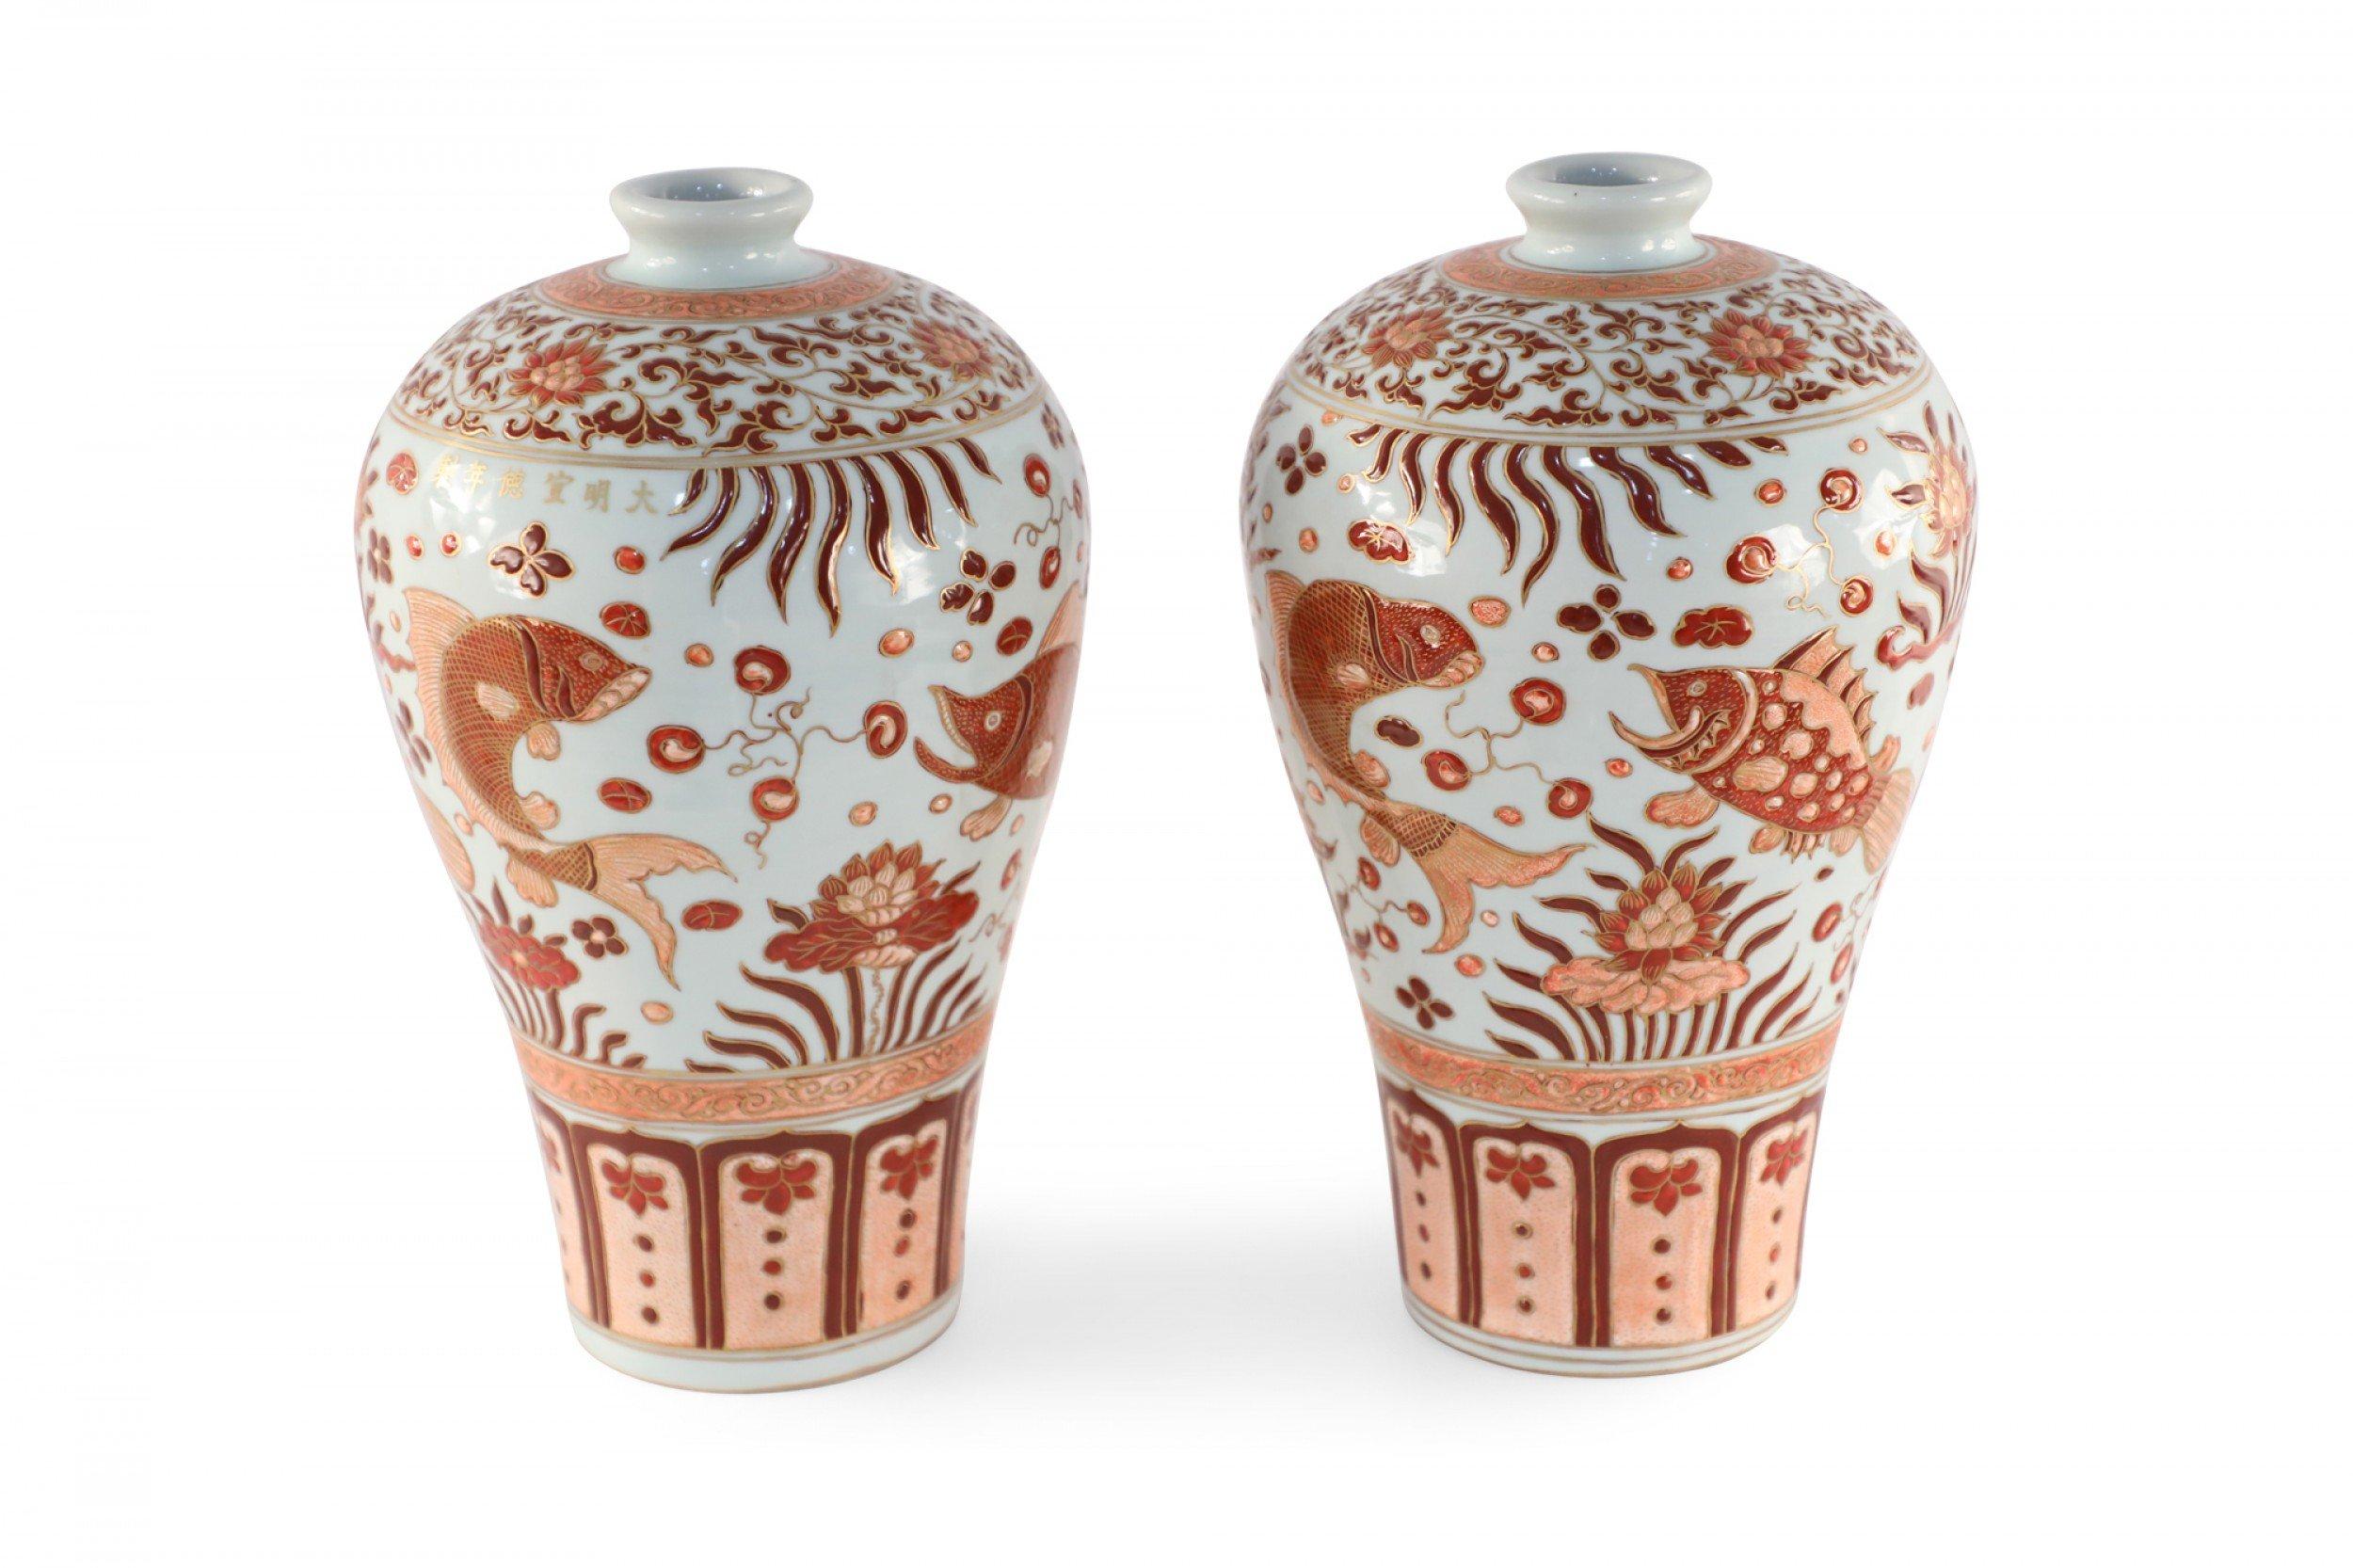 Pair of Chinese beige porcelain vases with Meiping forms decorated in orange fish and flower motifs and geometric-patterned bands around the tops and bases, accented in gold detailing.